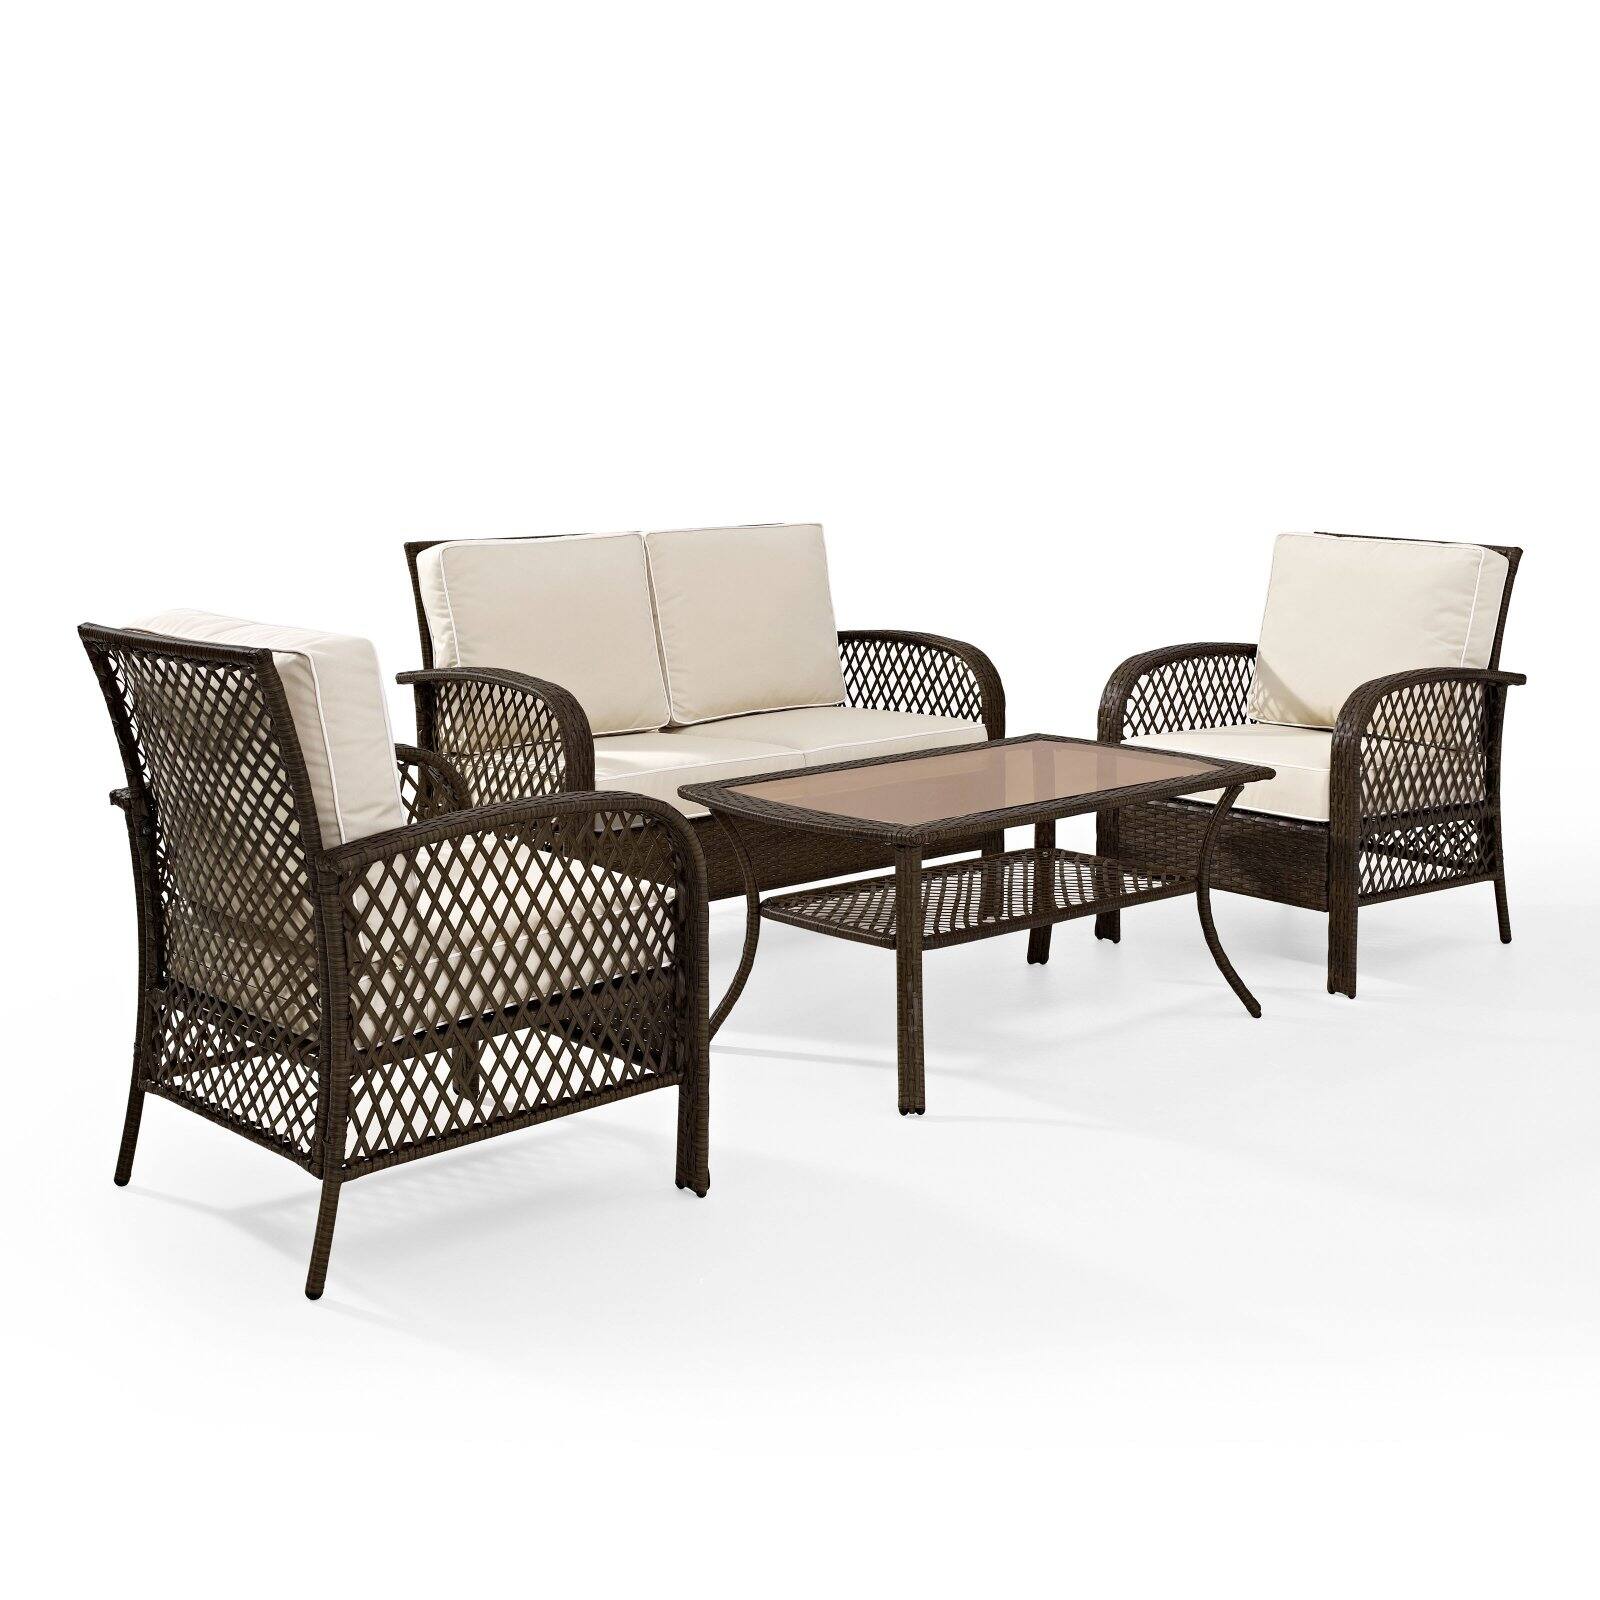 Crosley Tribeca 4 Piece Wicker Patio Sofa Set in Brown and Sand - image 2 of 10